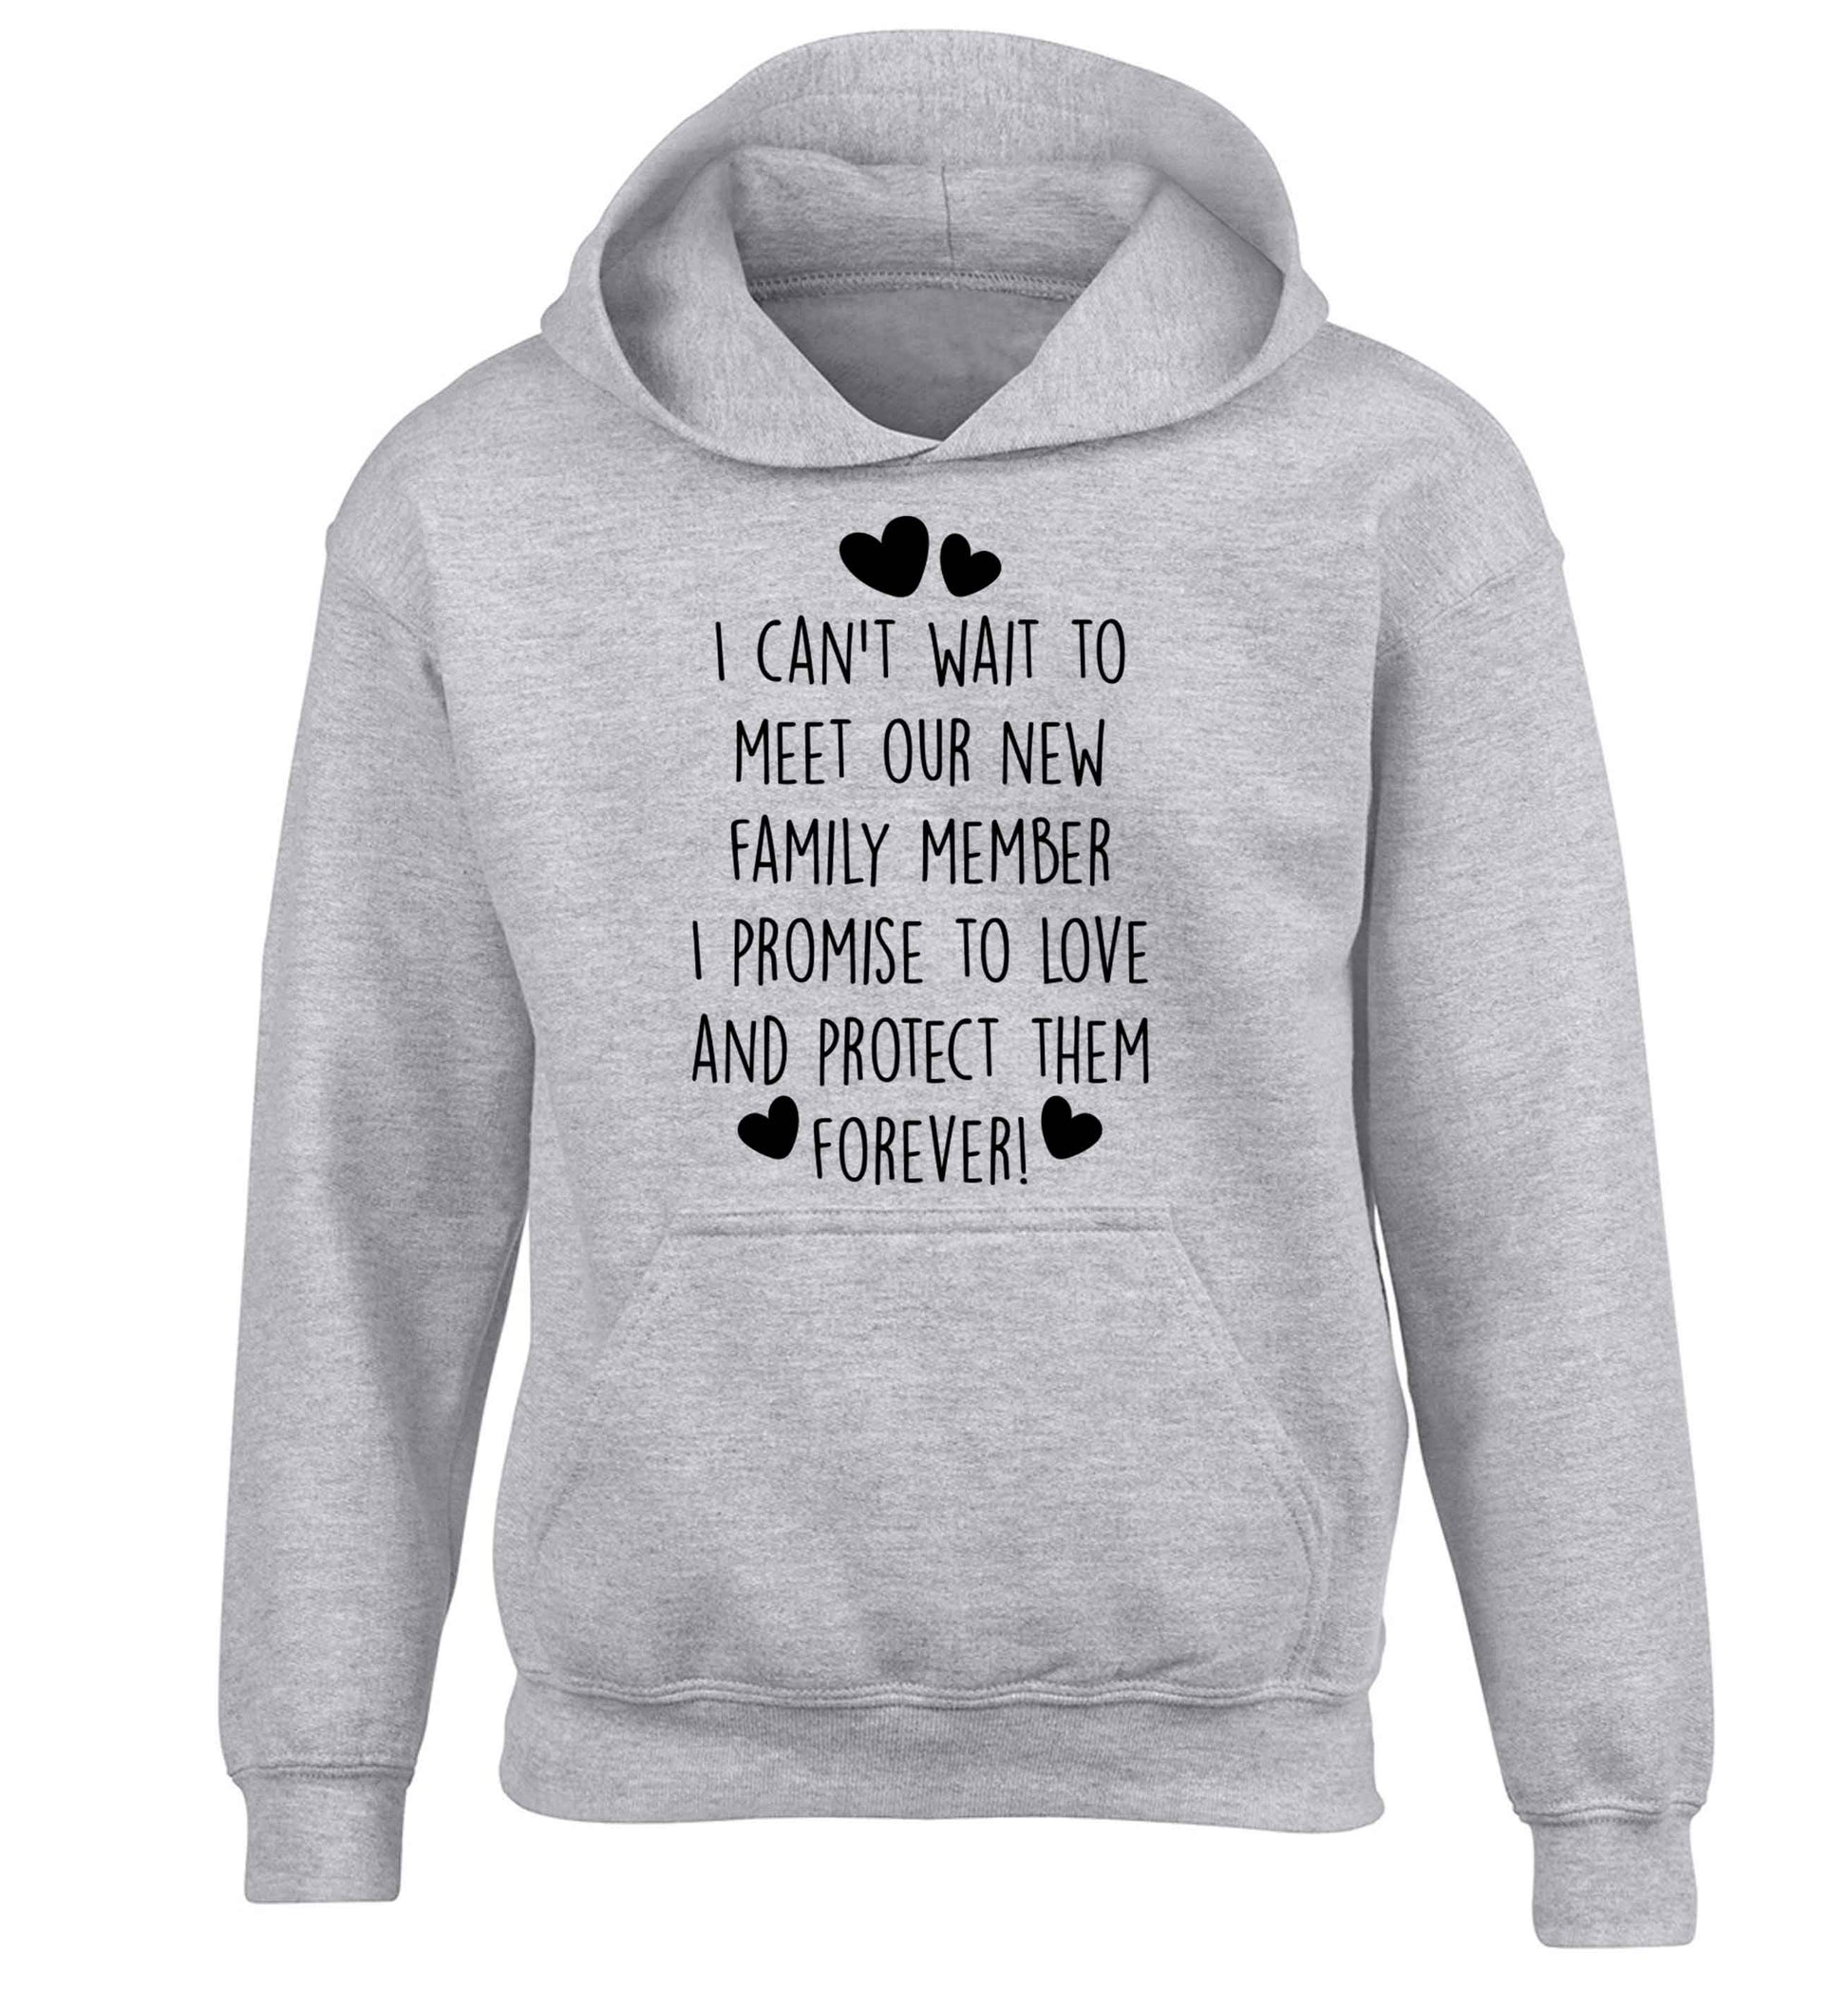 I can't wait to meet our new family member I promise to love and protect them foreverchildren's grey hoodie 12-13 Years